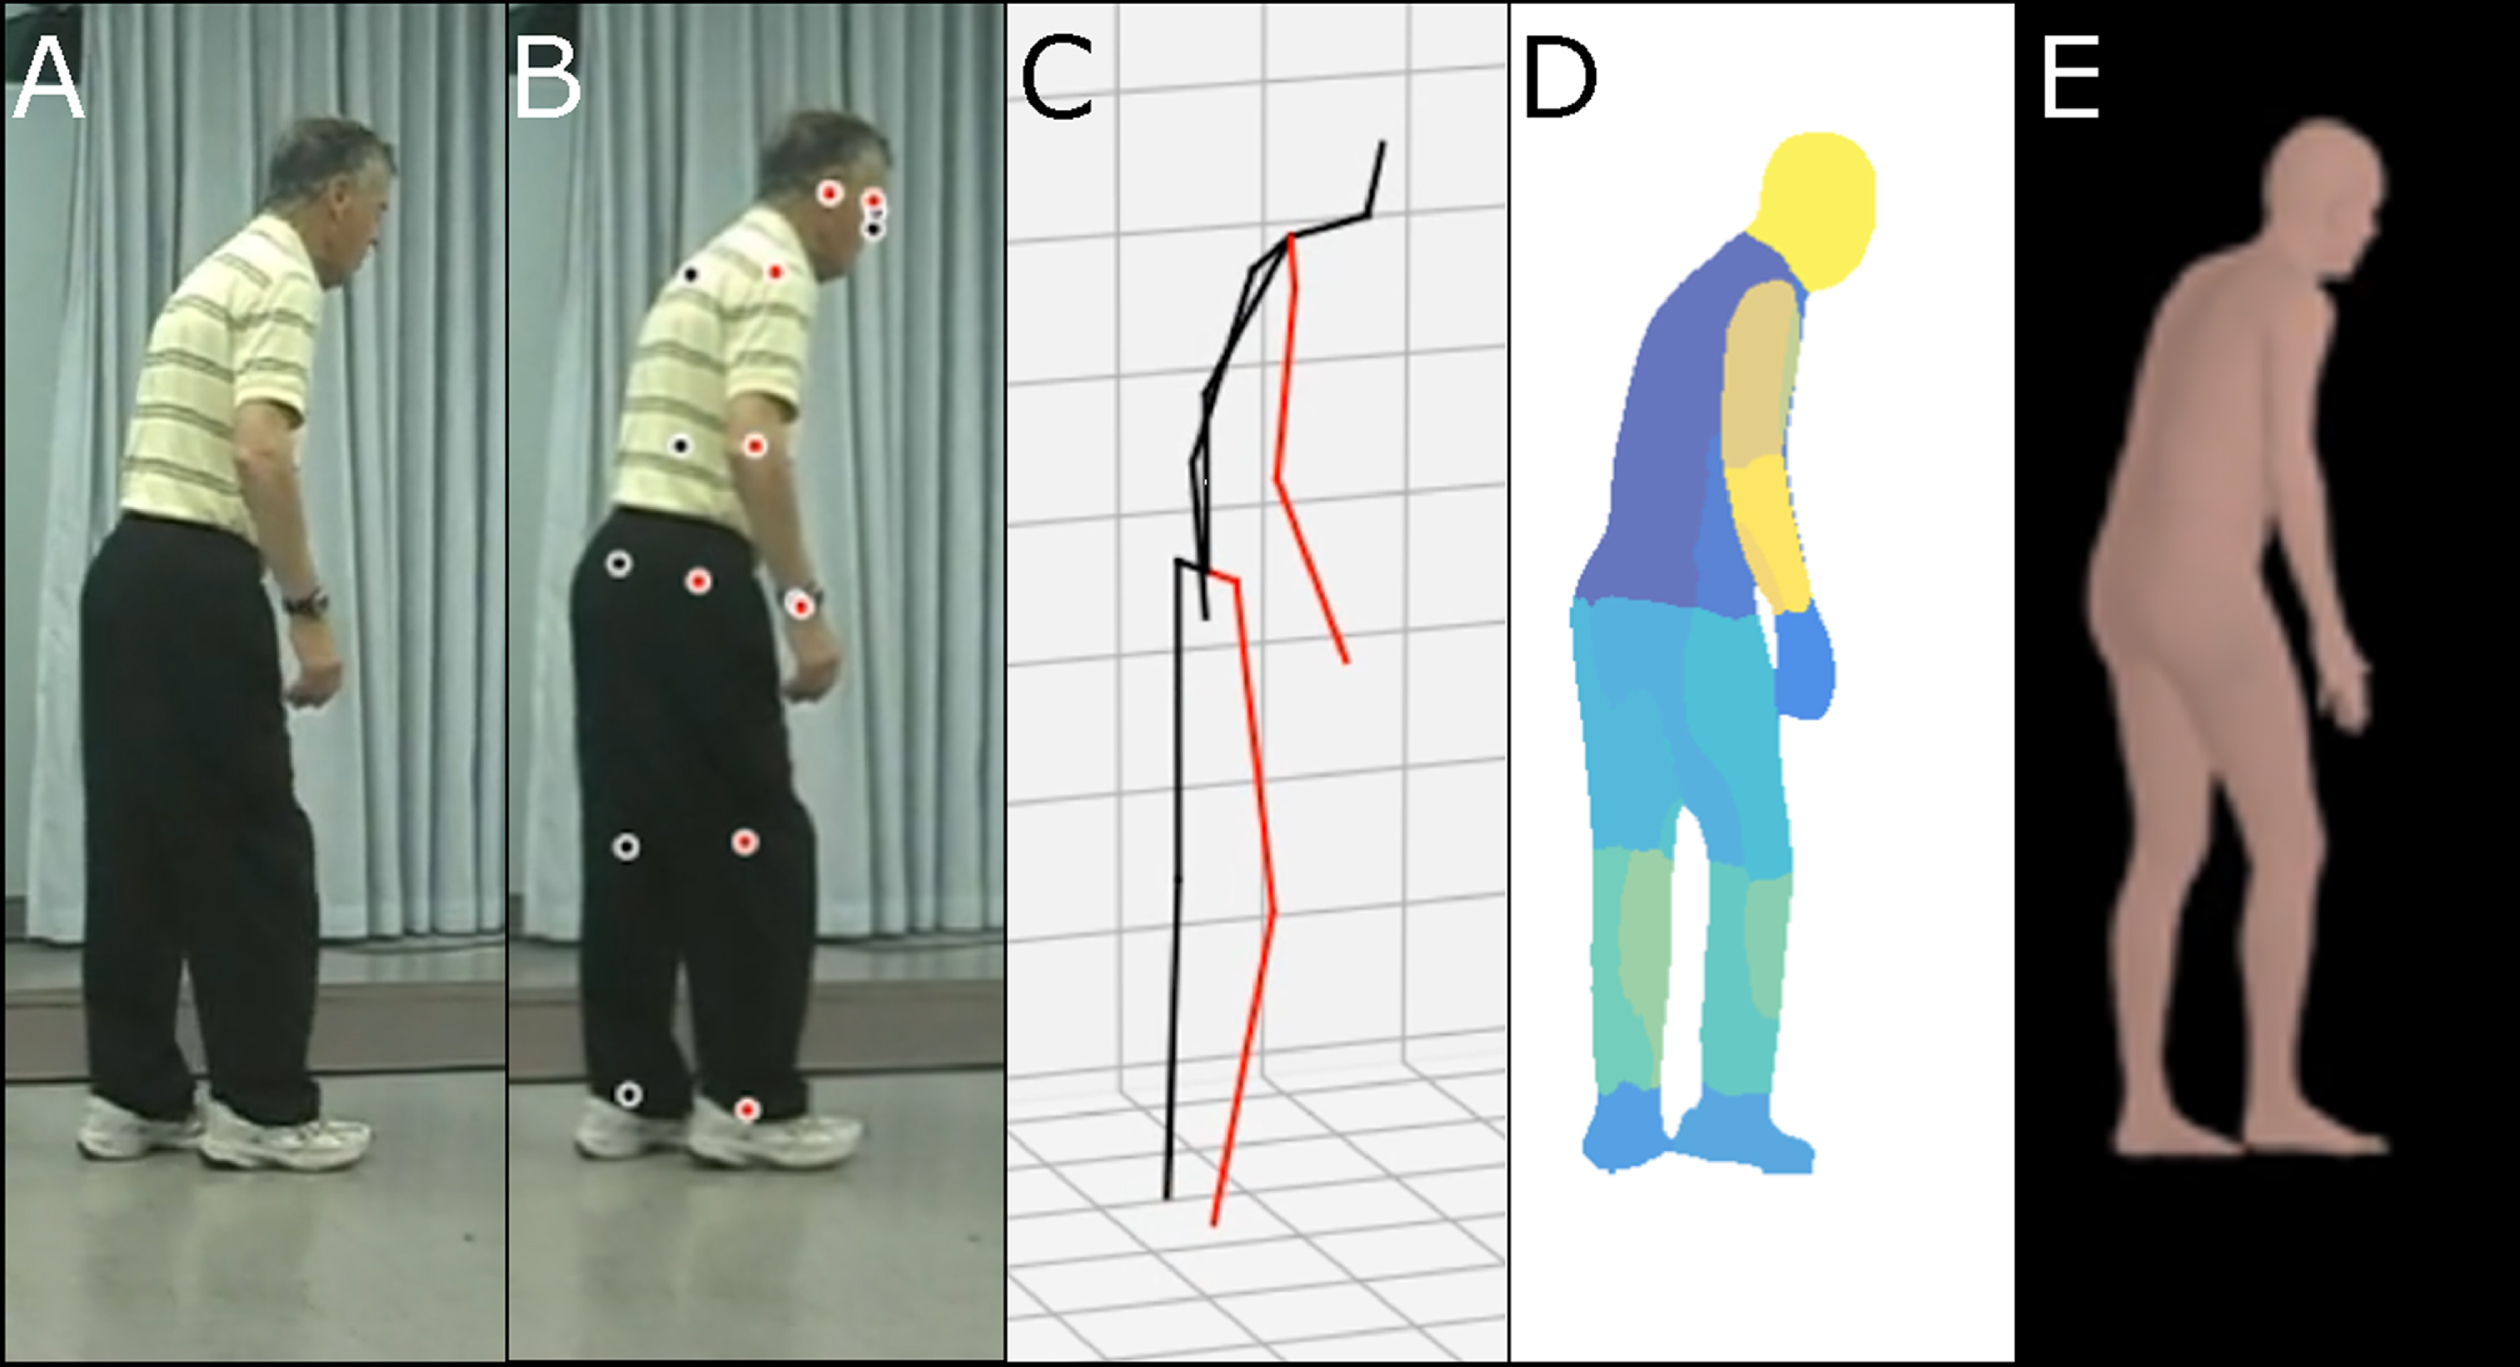 Illustration of synthetic human body modeling methods. A) Raw video image from open-source examples of Parkinson’s disease characterization through postural assessment. This video was obtained with permission from publisher Wiley [57]. B) Keypoints overlaid on video images. C) Skeletal representation. D) Body-parts-based representation. E) 3D volumetric representation.